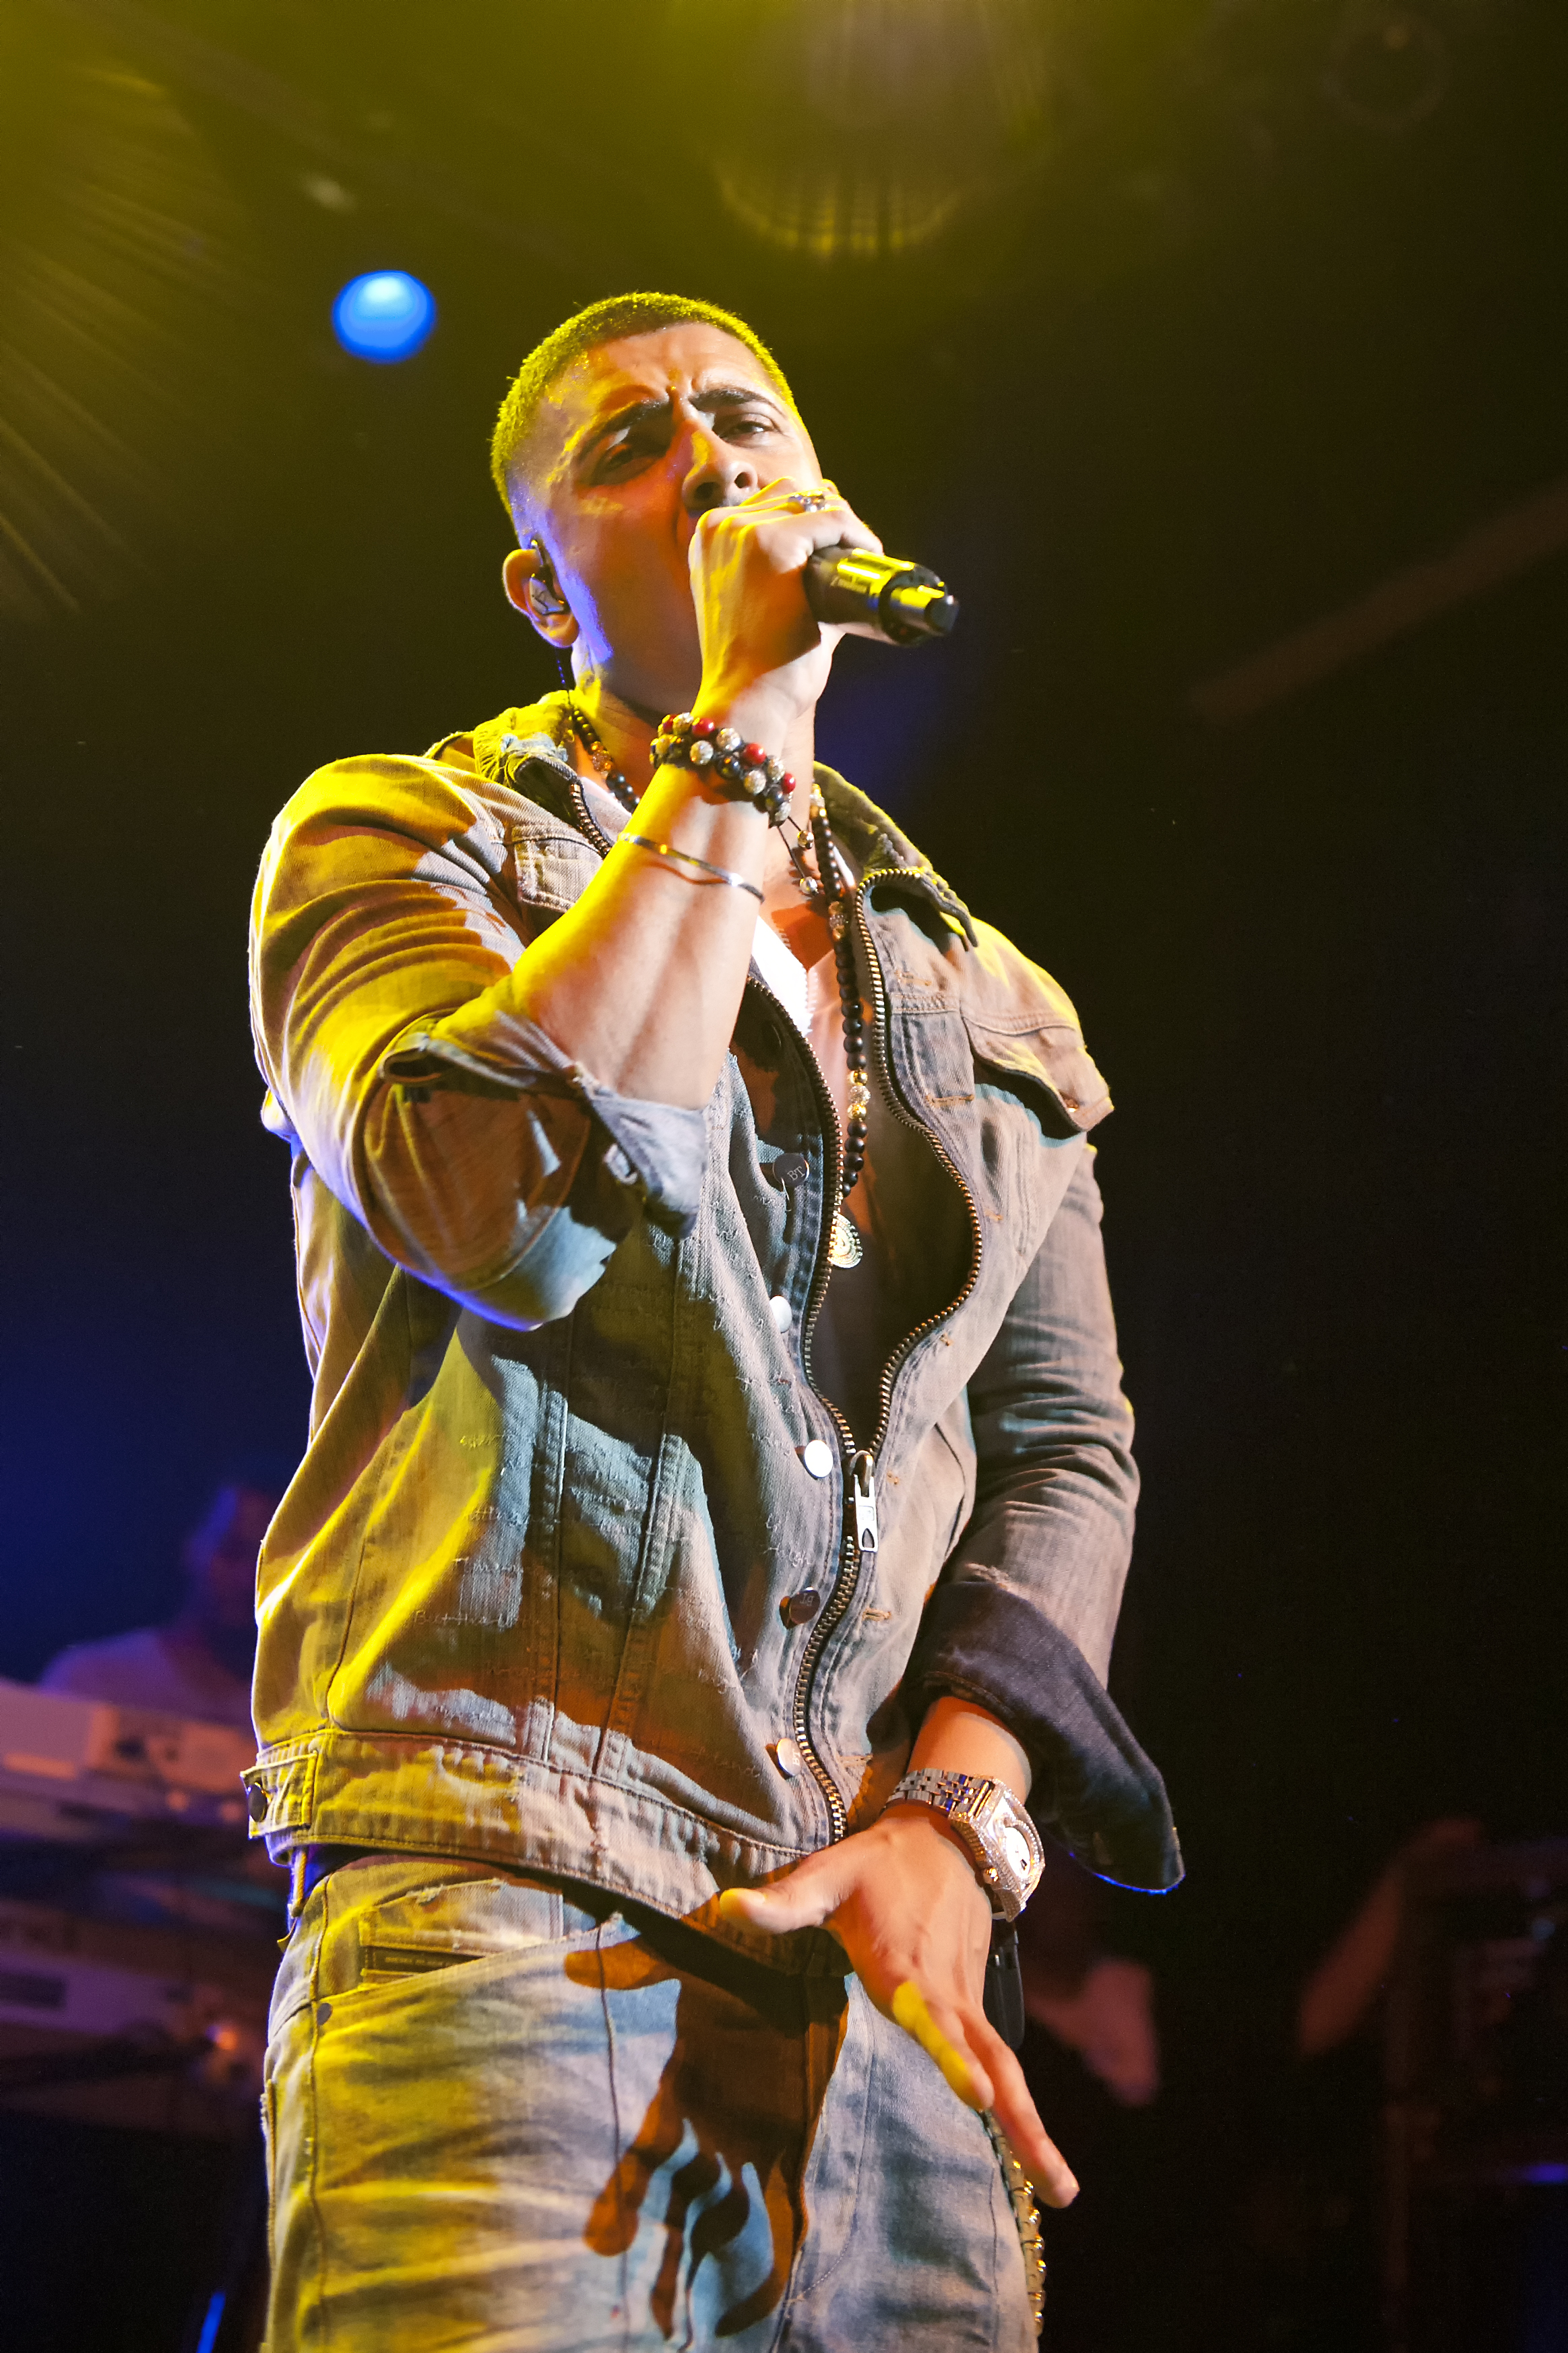  HOLLYWOOD, CA – British artist Jay Sean performs his 2009 hit “Do You Remember” at the House of Blues on Tuesday, September 20, 2011. 